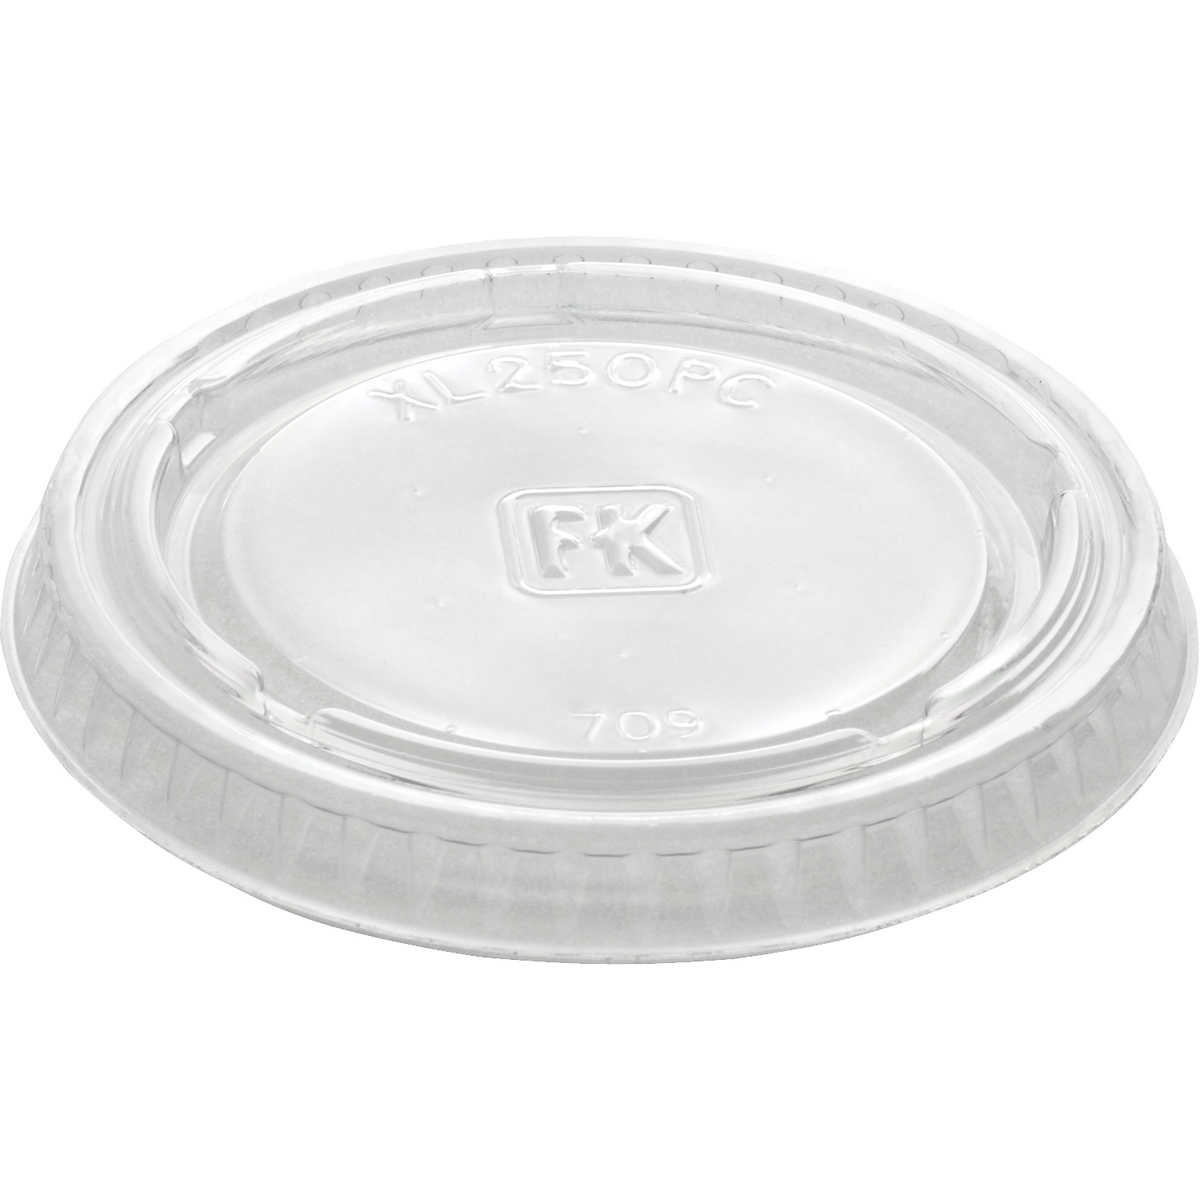 Details about   2 oz Portion Cup Lids Only 2500 ct Food Service Disposable Recycle Ramekin Lids 